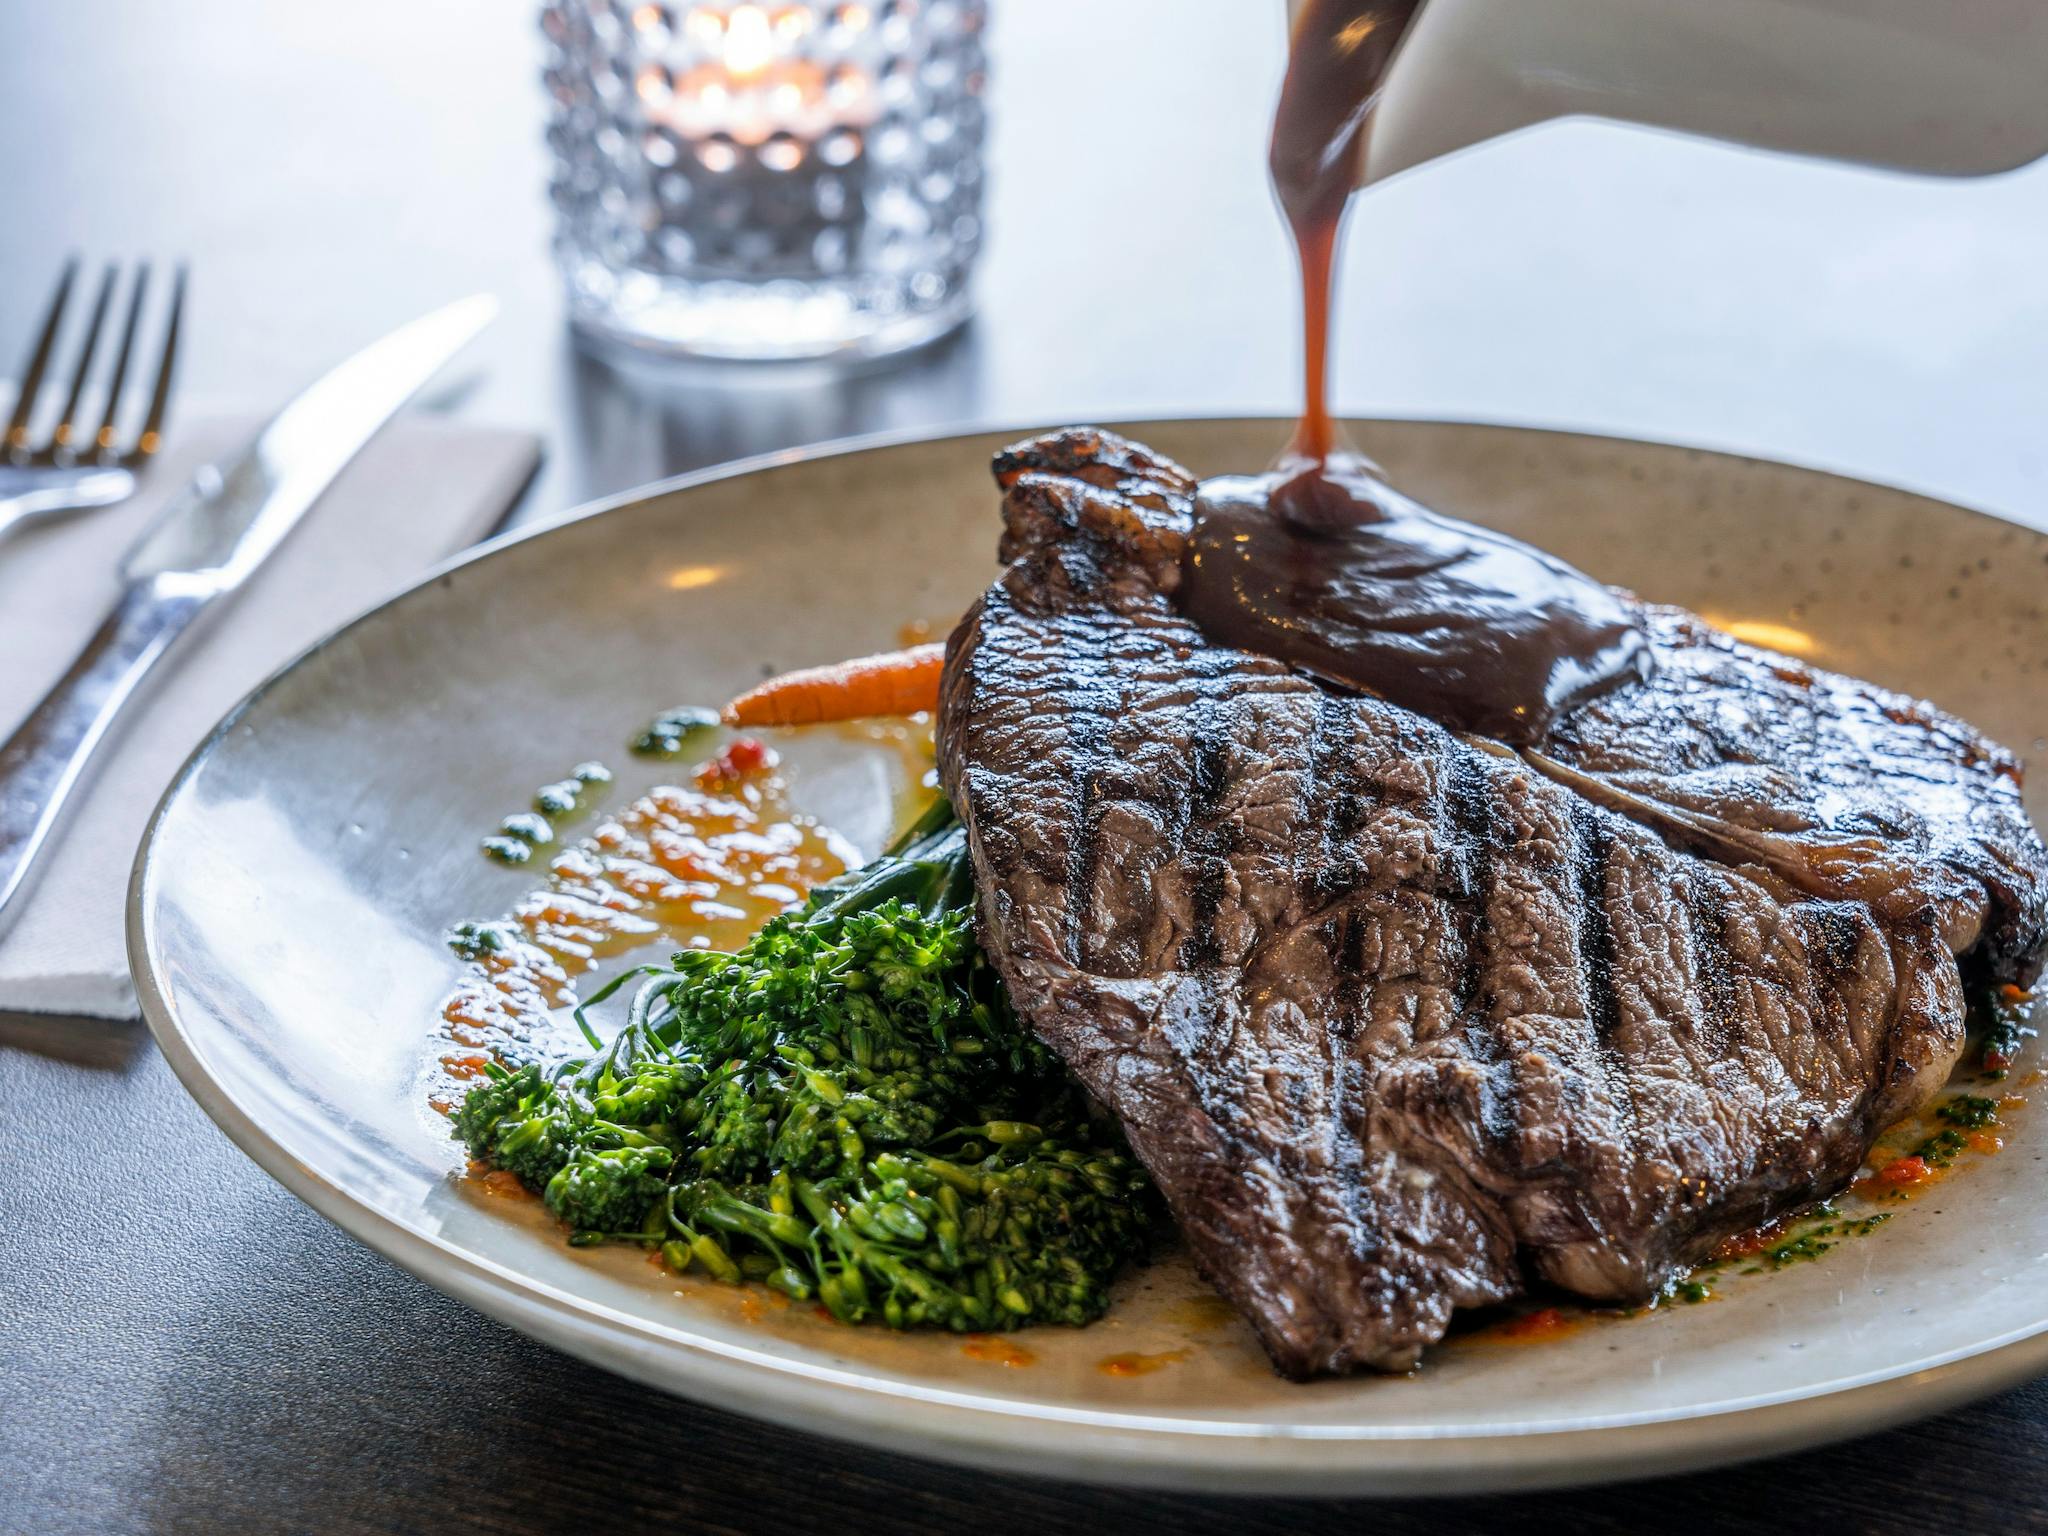 Grass-fed black angus rump known for its superior marbling traits; so tender and juicy. Cooked